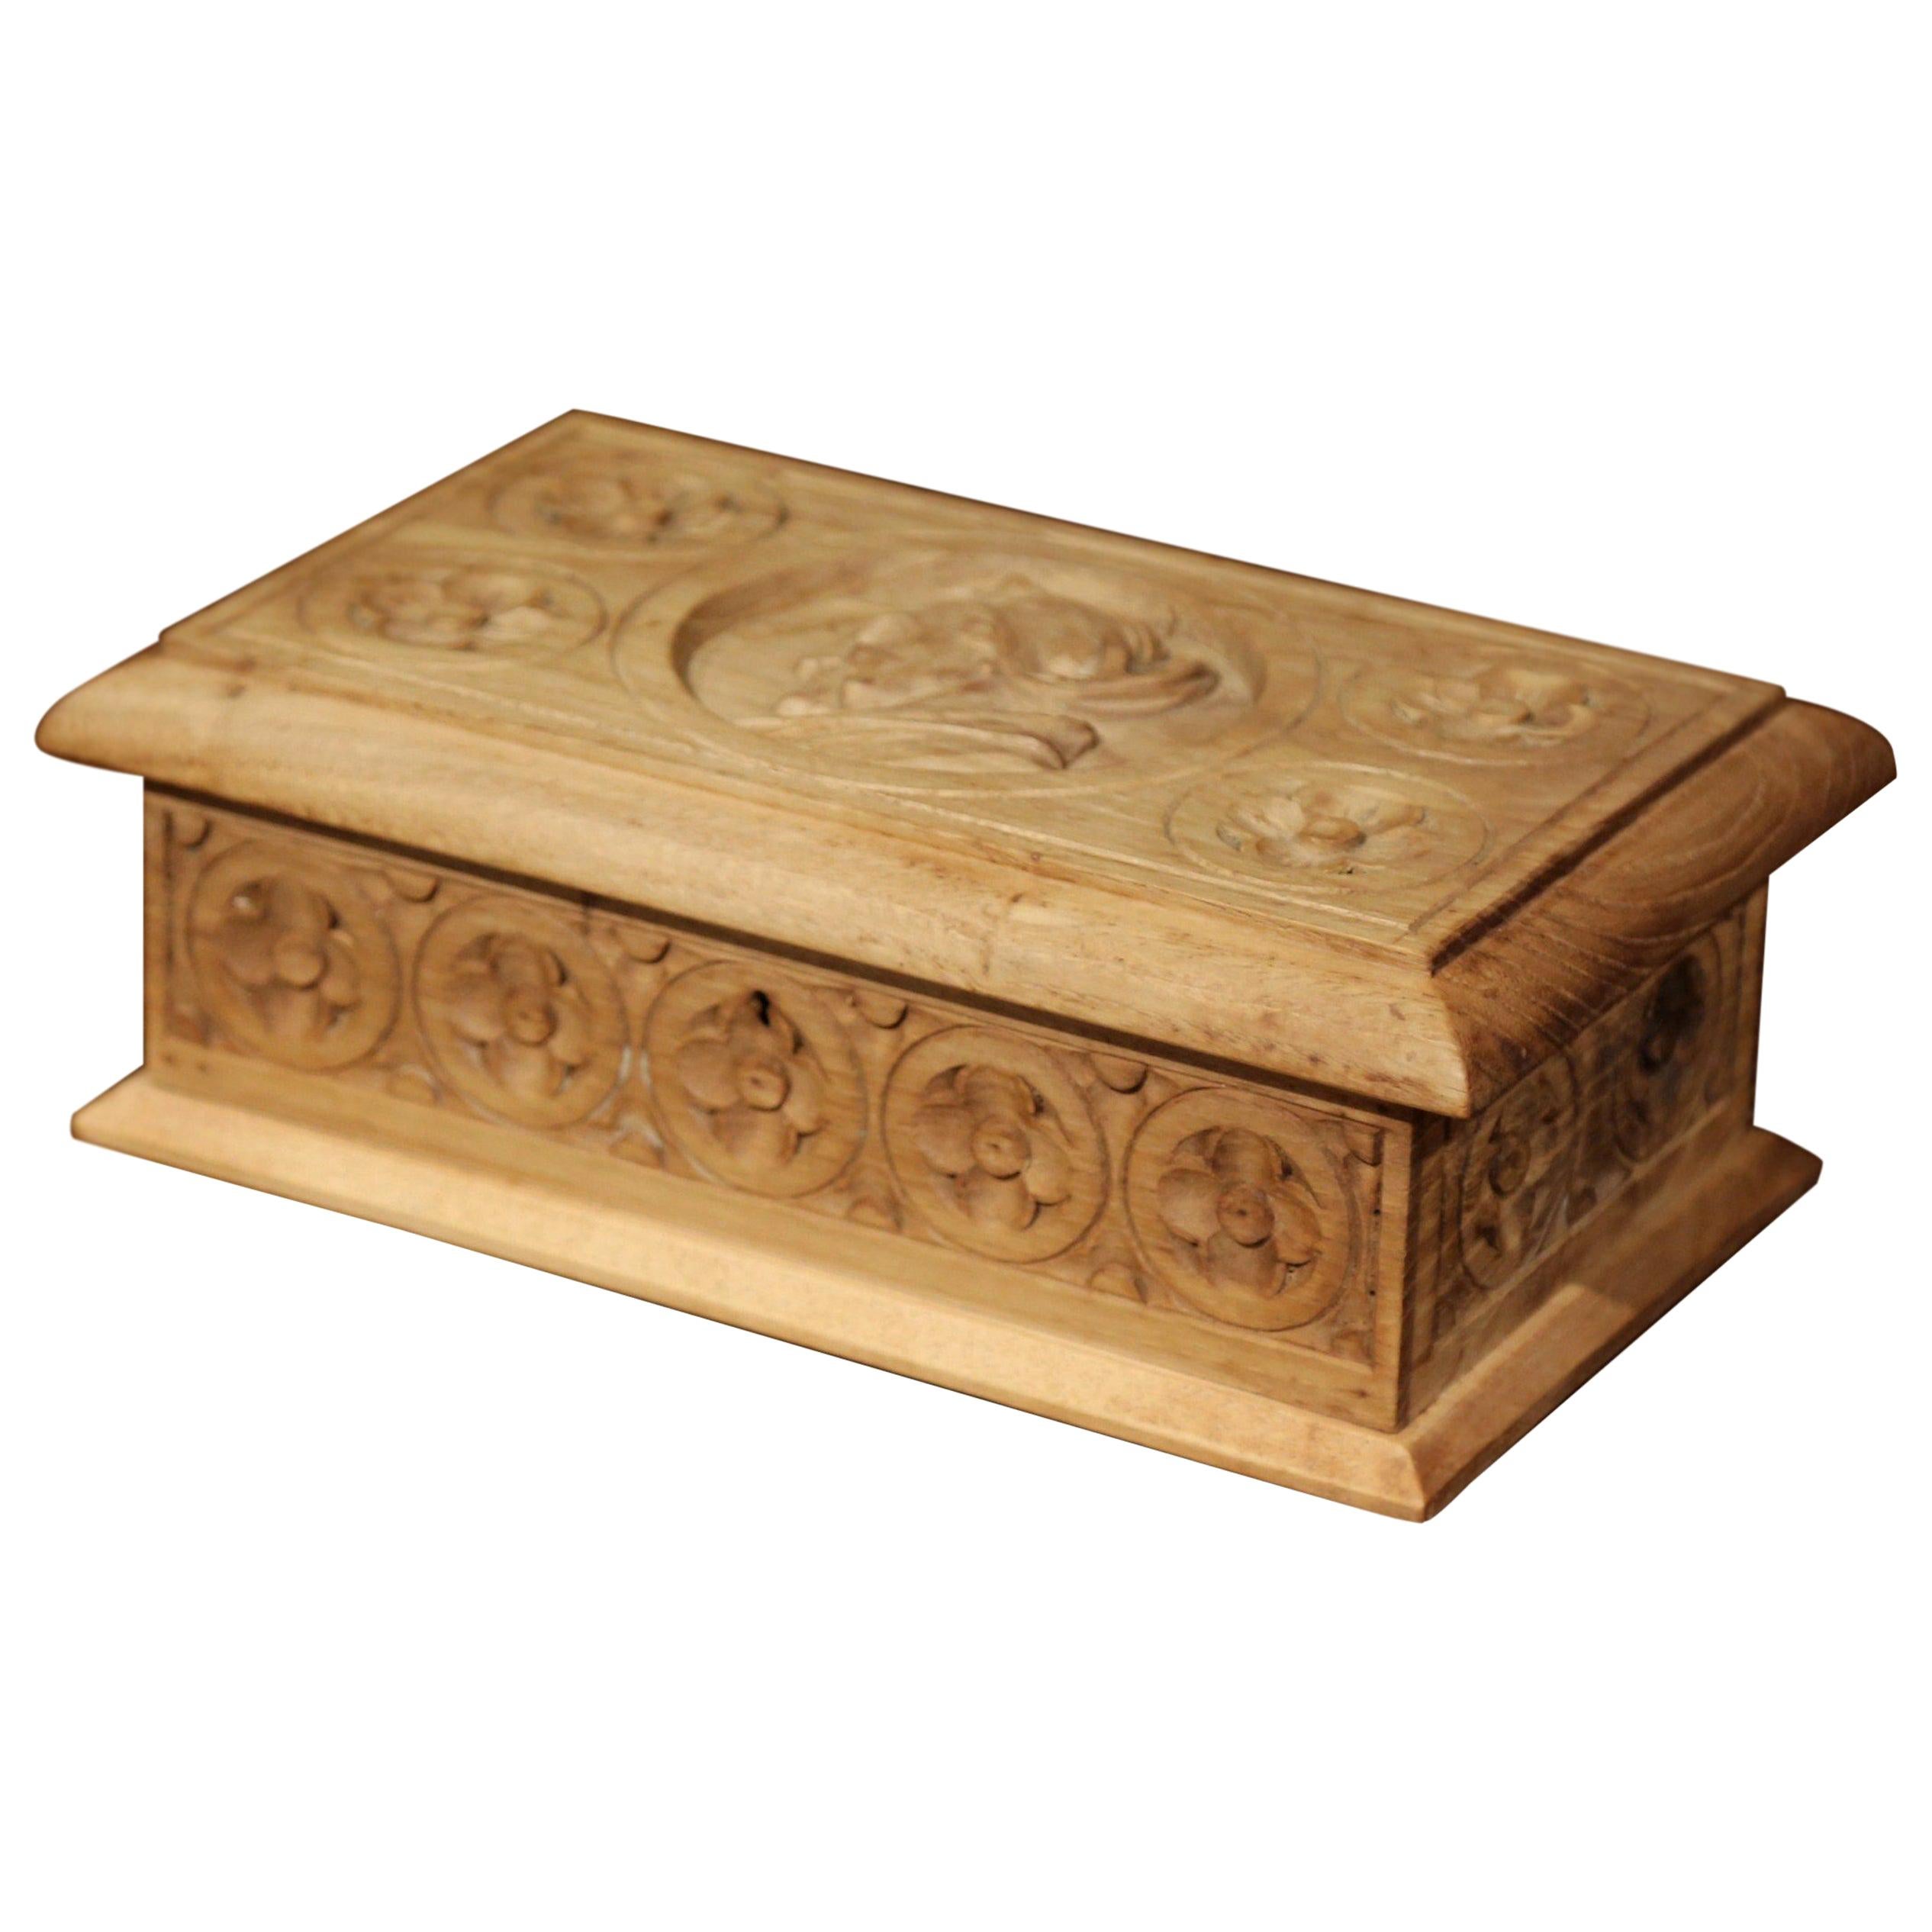 Early 20th Century French Carved Chestnut Box from Brittany Signed E. Bayon For Sale